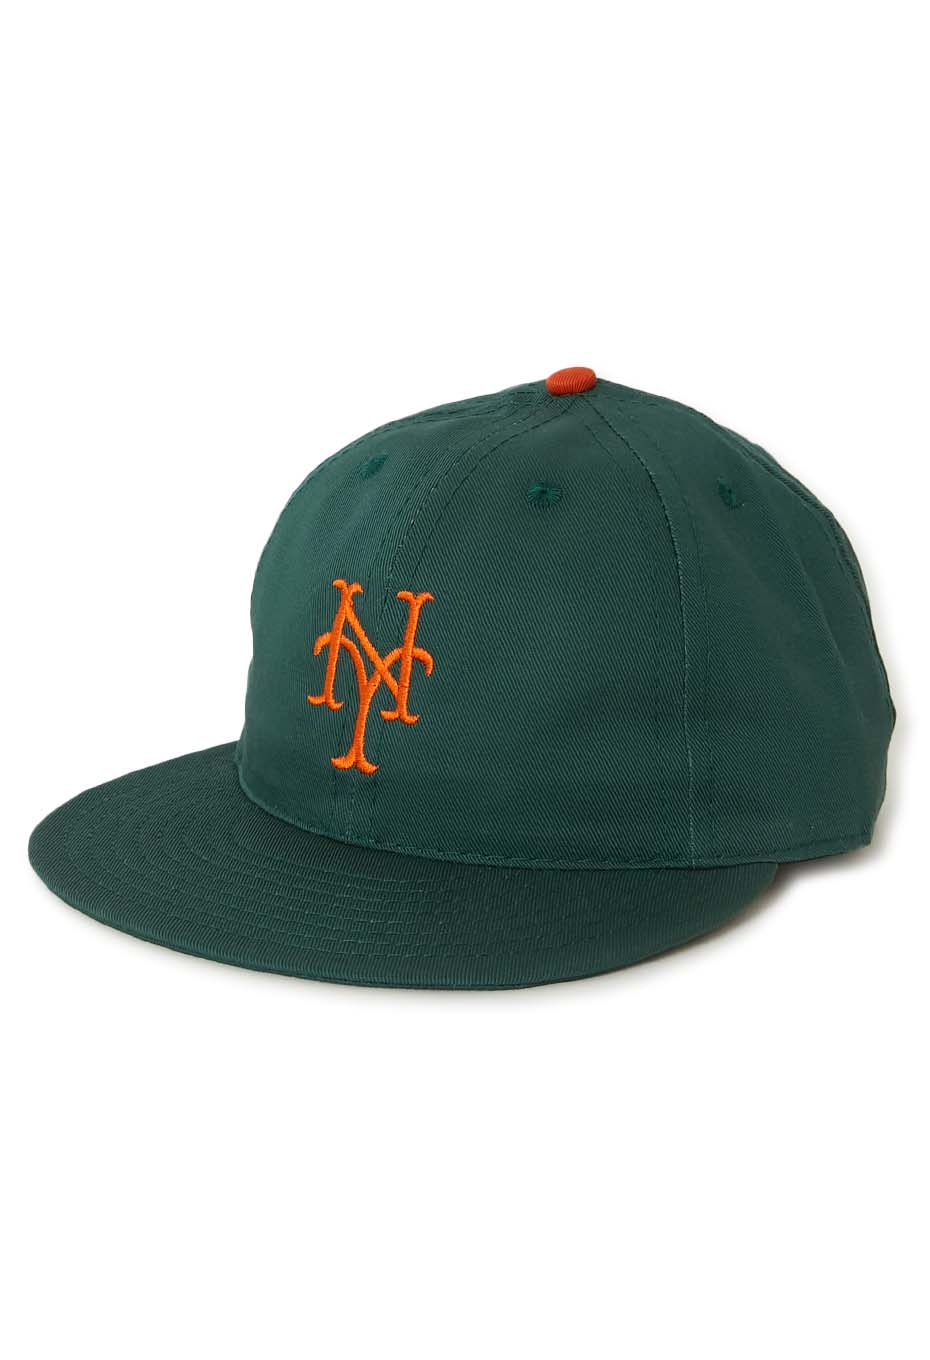 COOPERSTOWN BALL CAP for HIGH STANDARD /CHINO TWILL NY cap